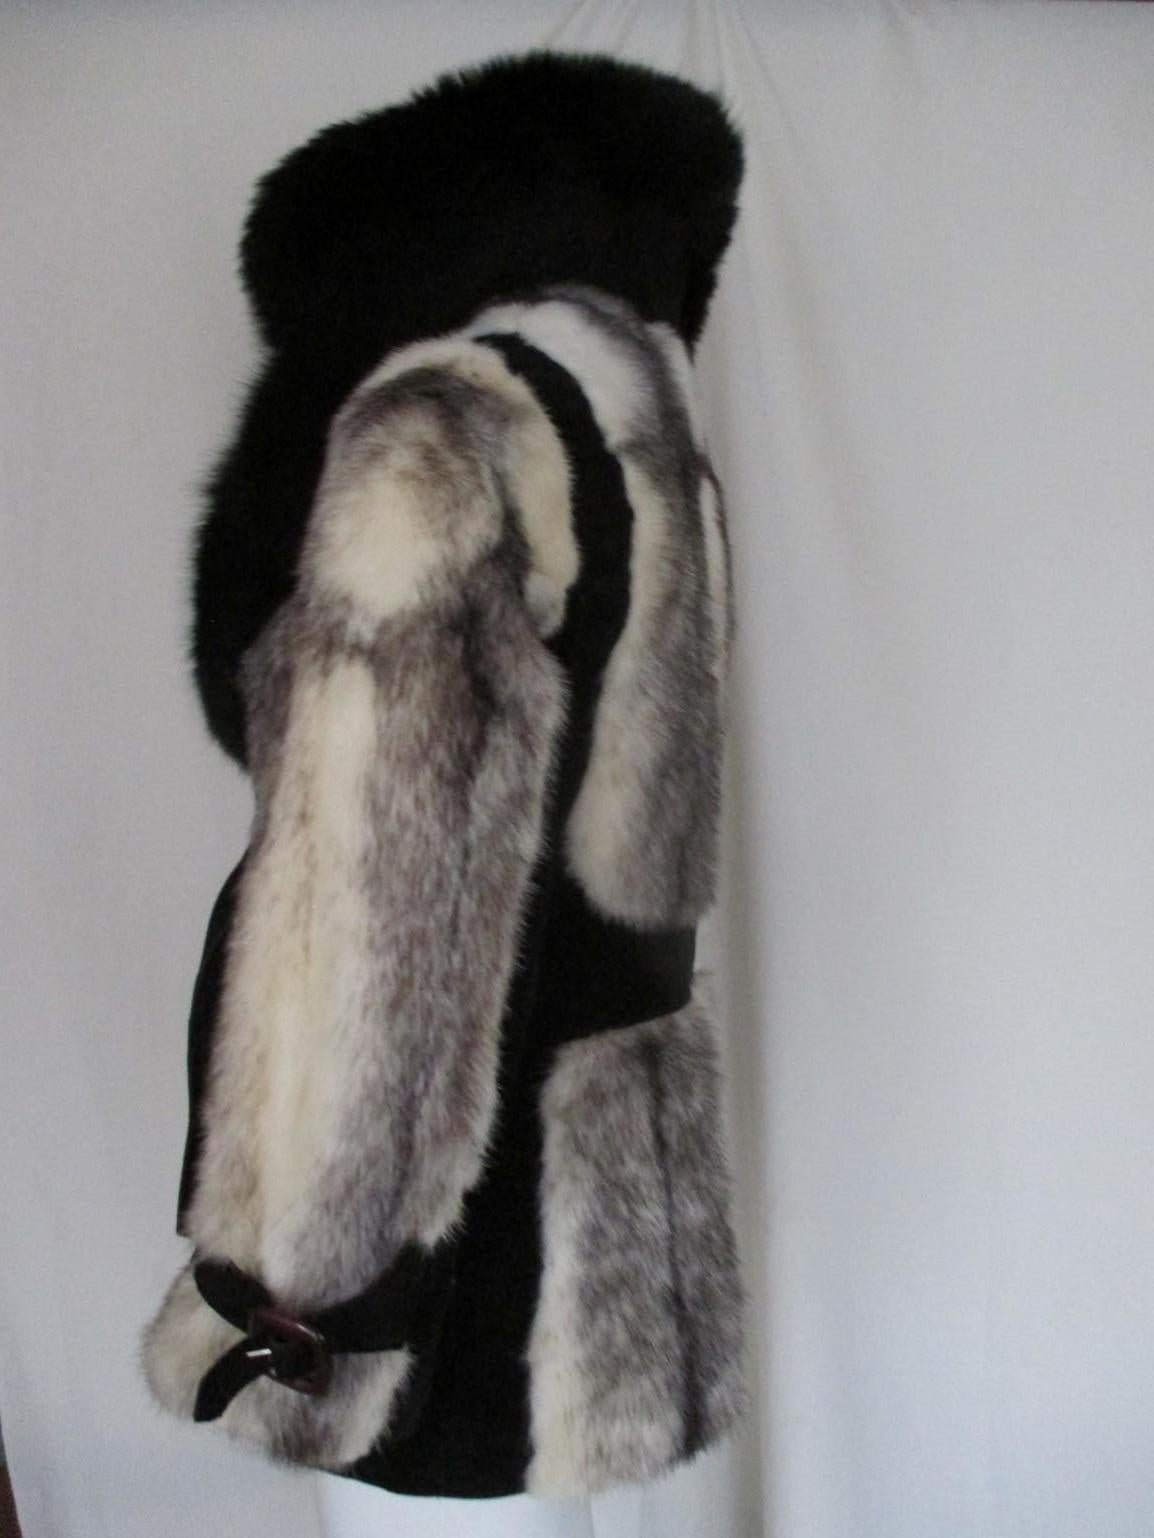 This vintage coat is made of kohinoor cross mink fur with black suede panels details a black fox collar and a attached front belt.
The coat has 2 buttons and 2 pockets.
Appears to be small/medium EU 38 / US 8-10, please refer to the measurements in